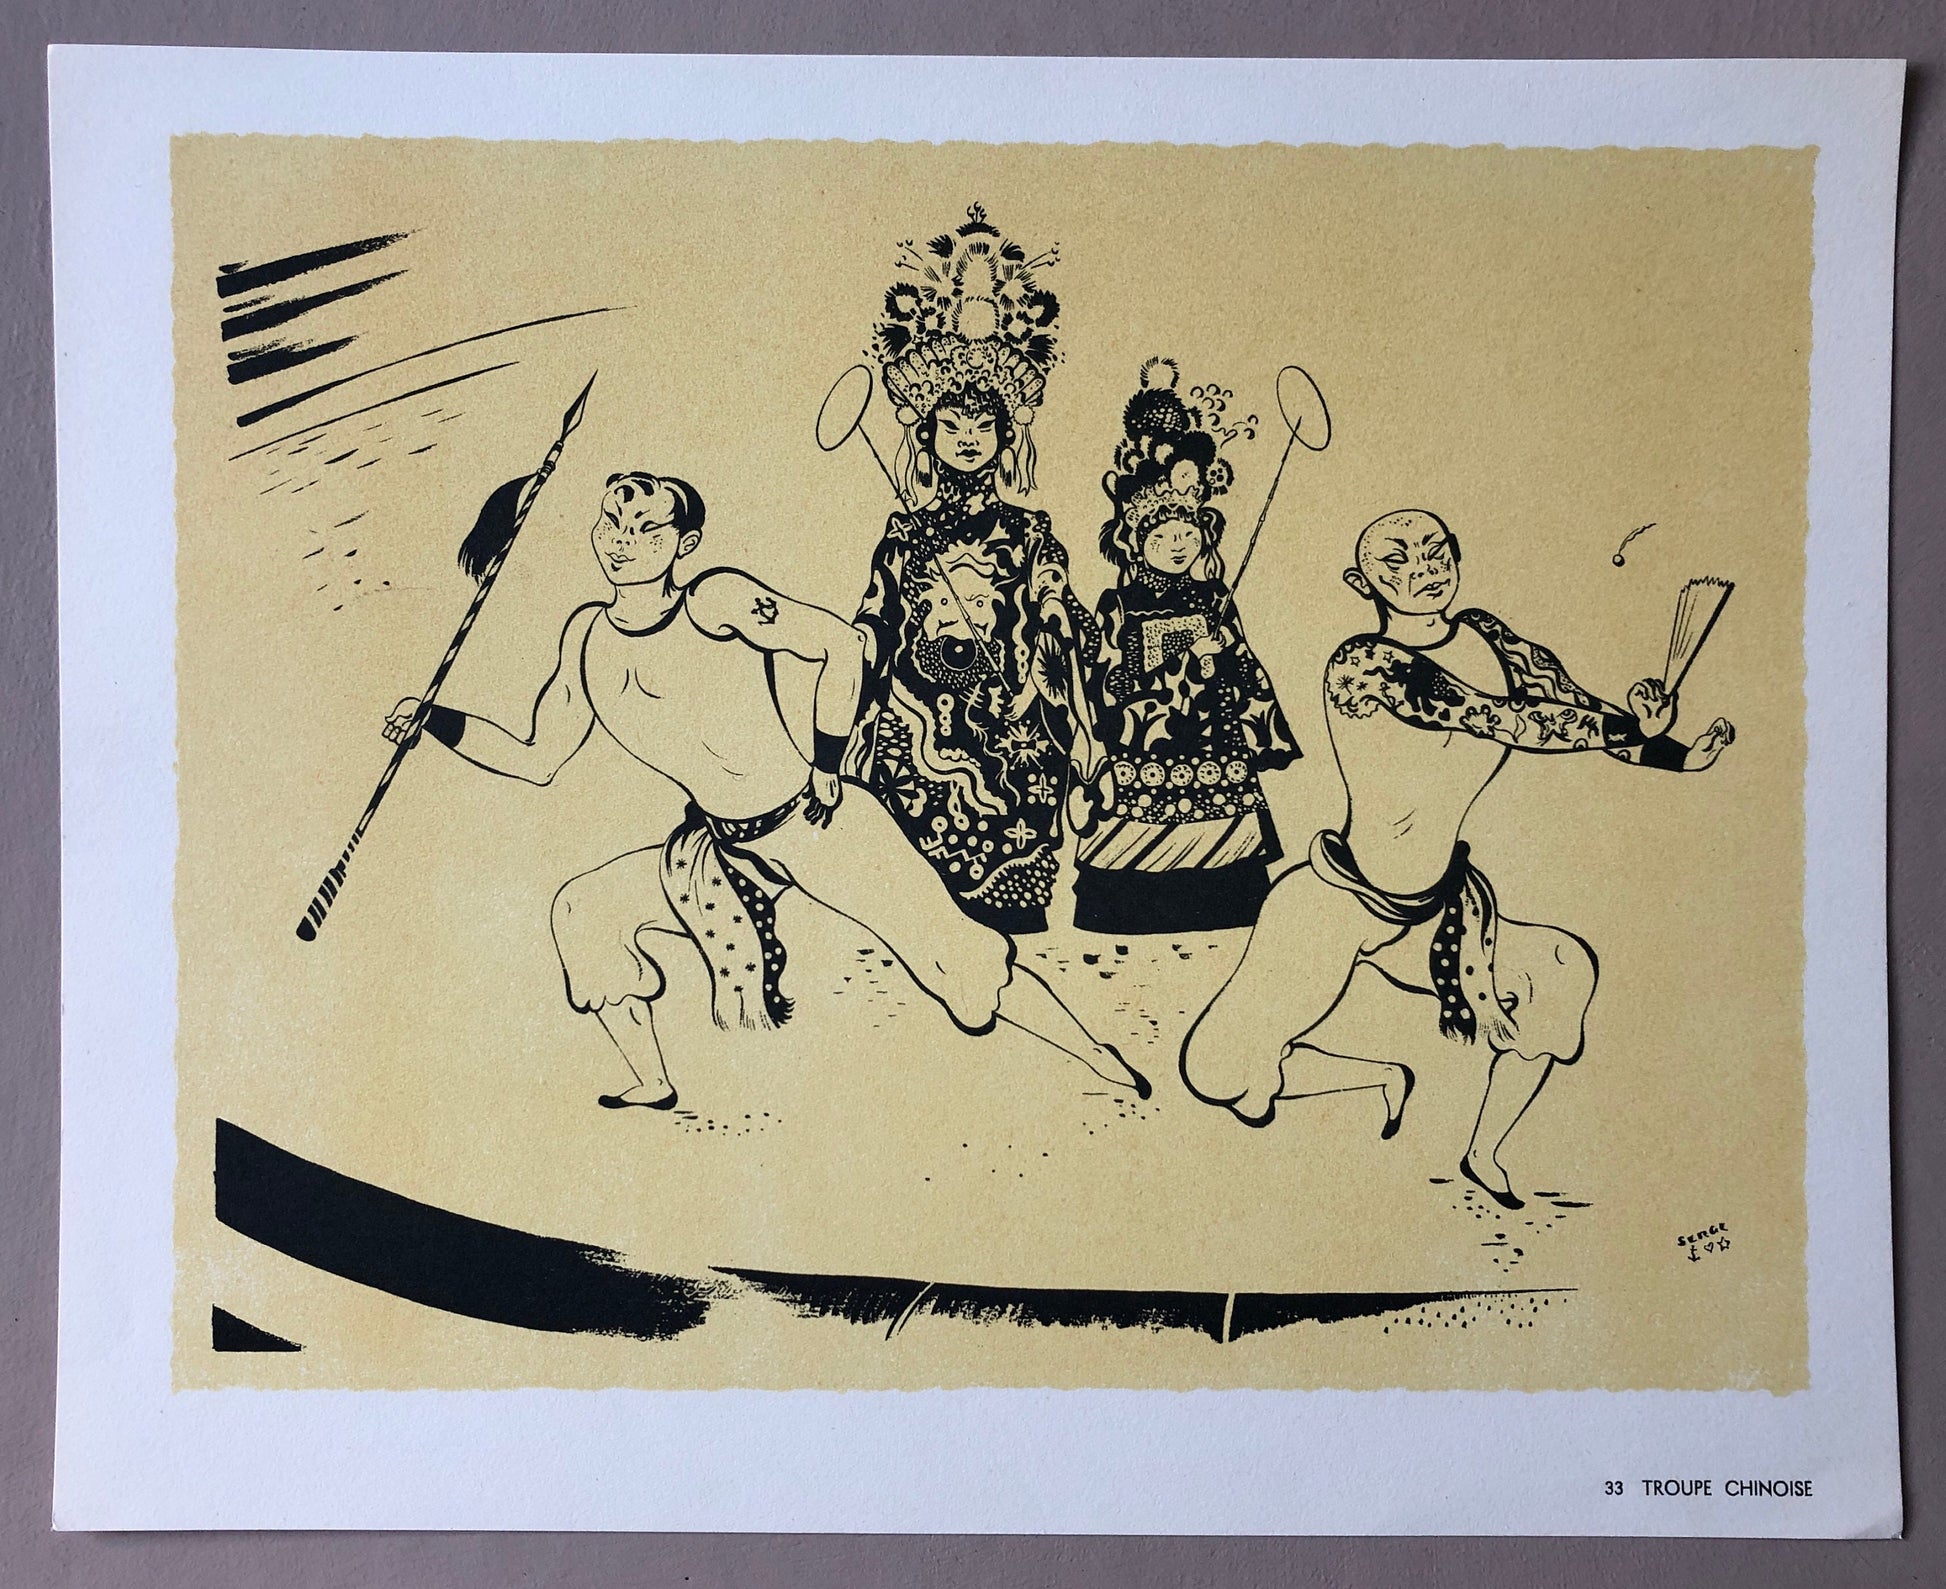 Troupe Chinoise. An Original Lithograph From The Parorama Du Cirque by Serge. One of only 1000 produced in 1944. Size: 23.8 x 29.7 cms.